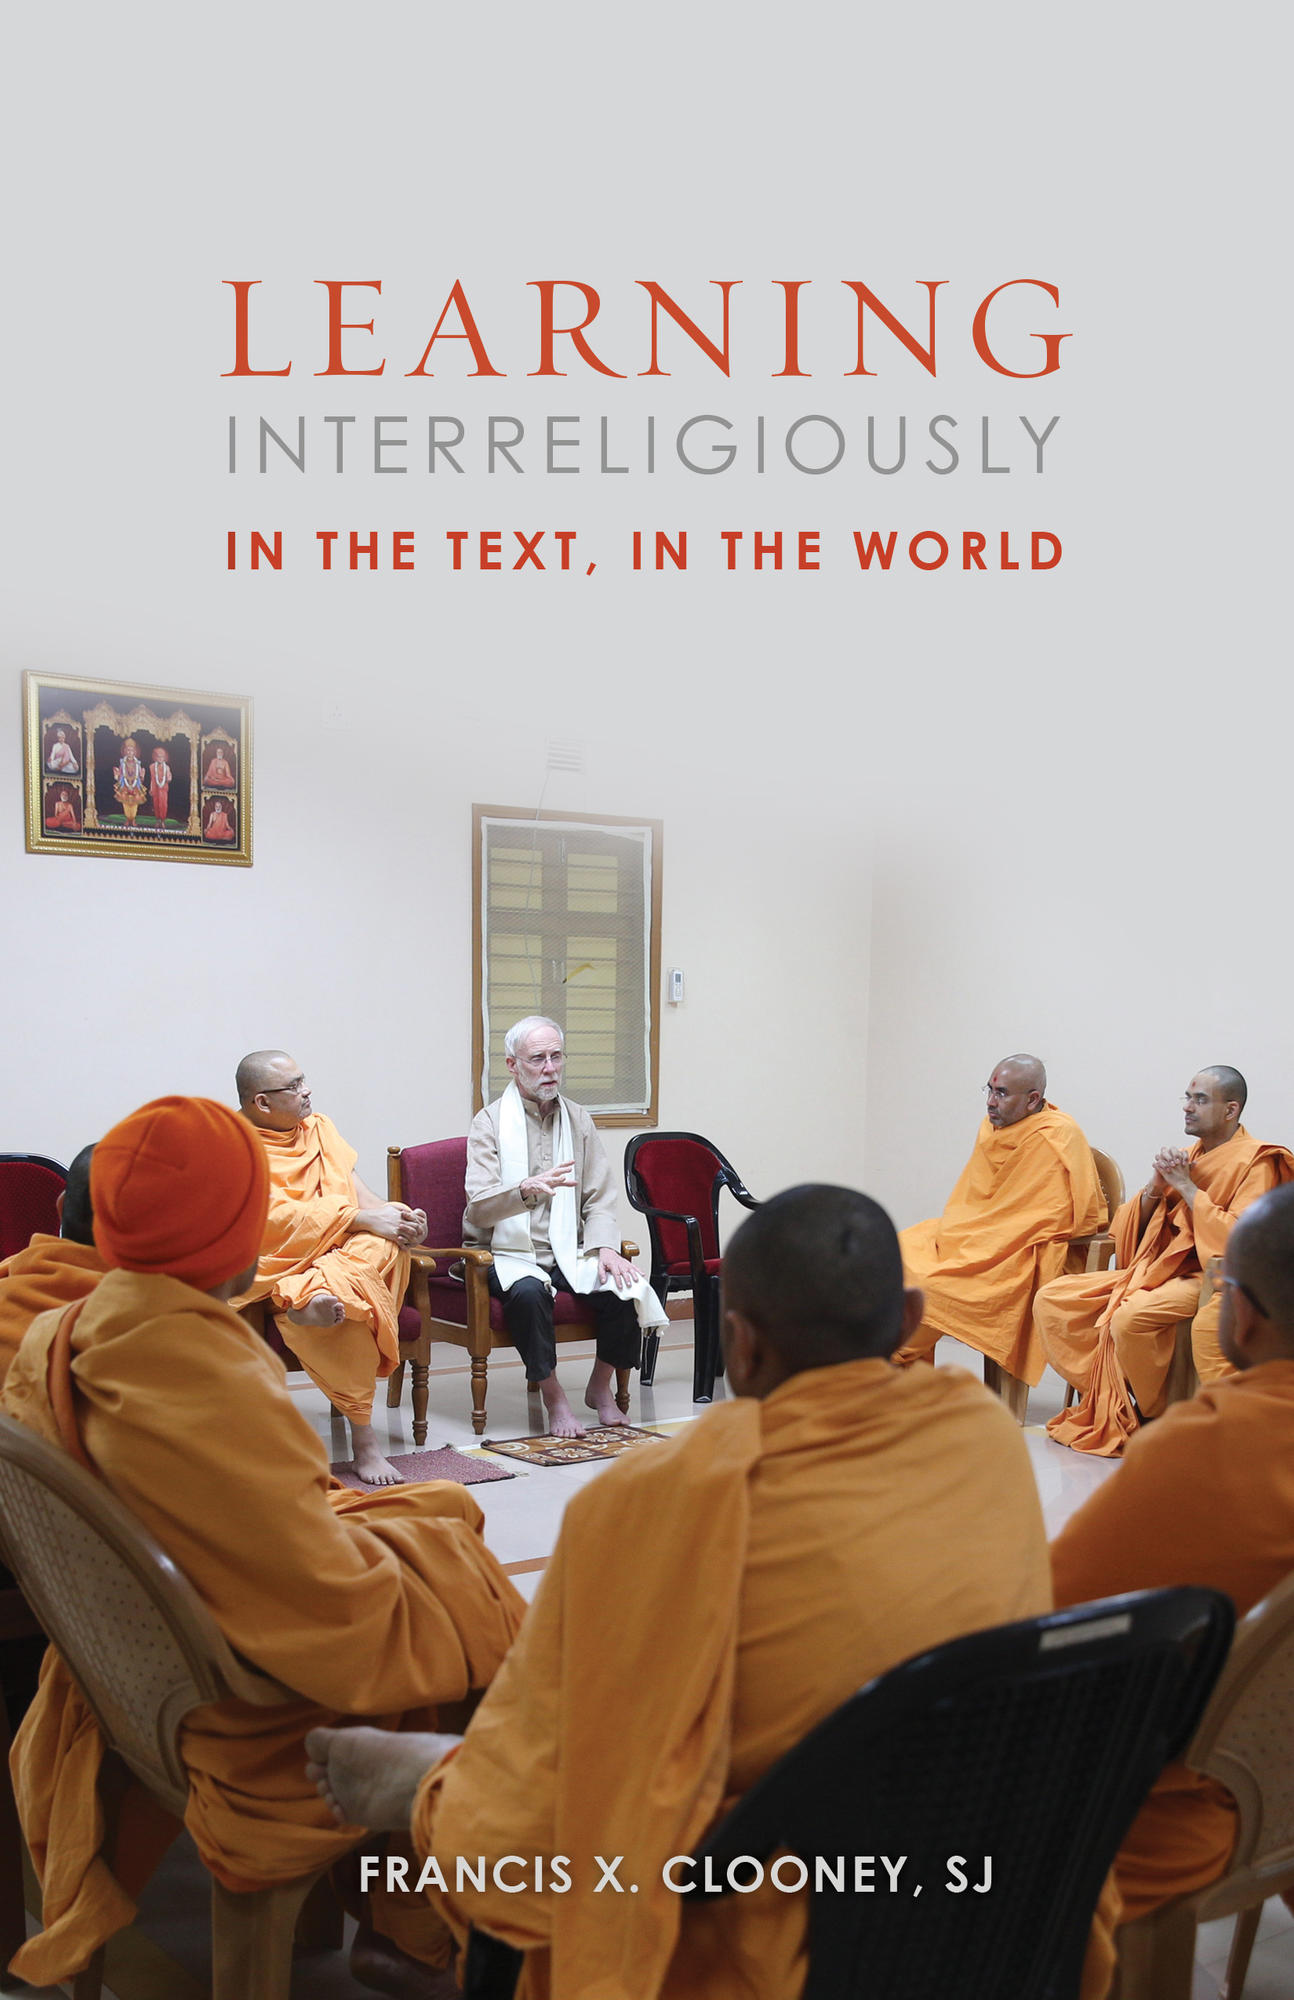 Learning Interreligiously: In the Text, In the World